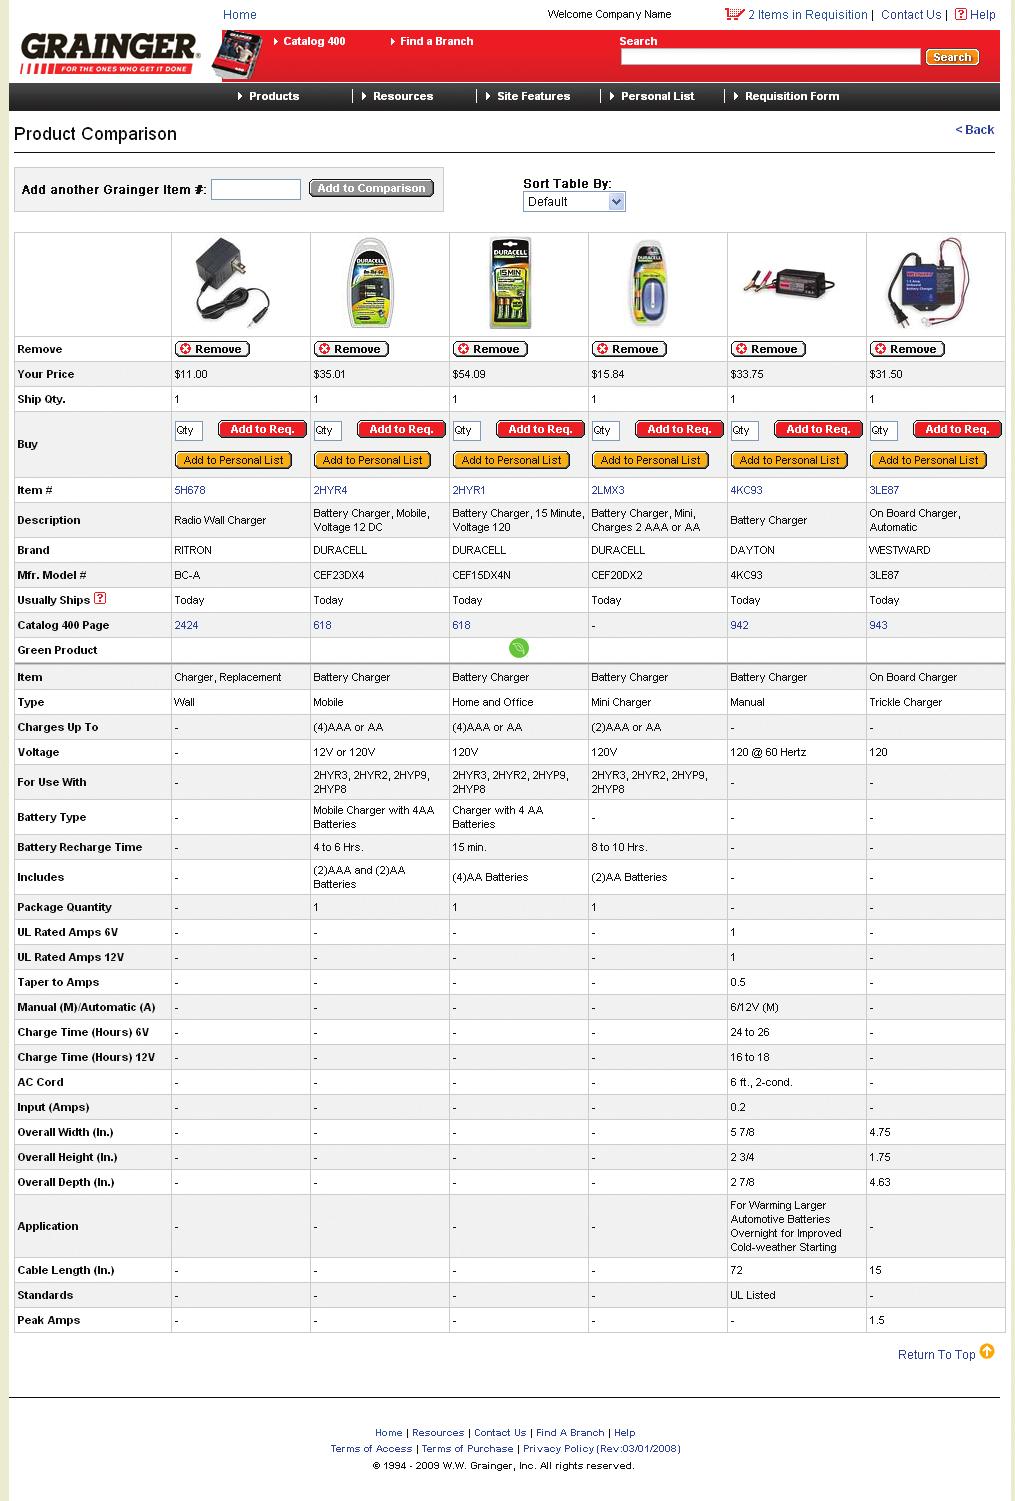 TURN SEARCH RESULTS INTO A POWERFUL COMPARISON TOOL WITH PRODUCT COMPARISON: Select up to eight items to compare at once View items